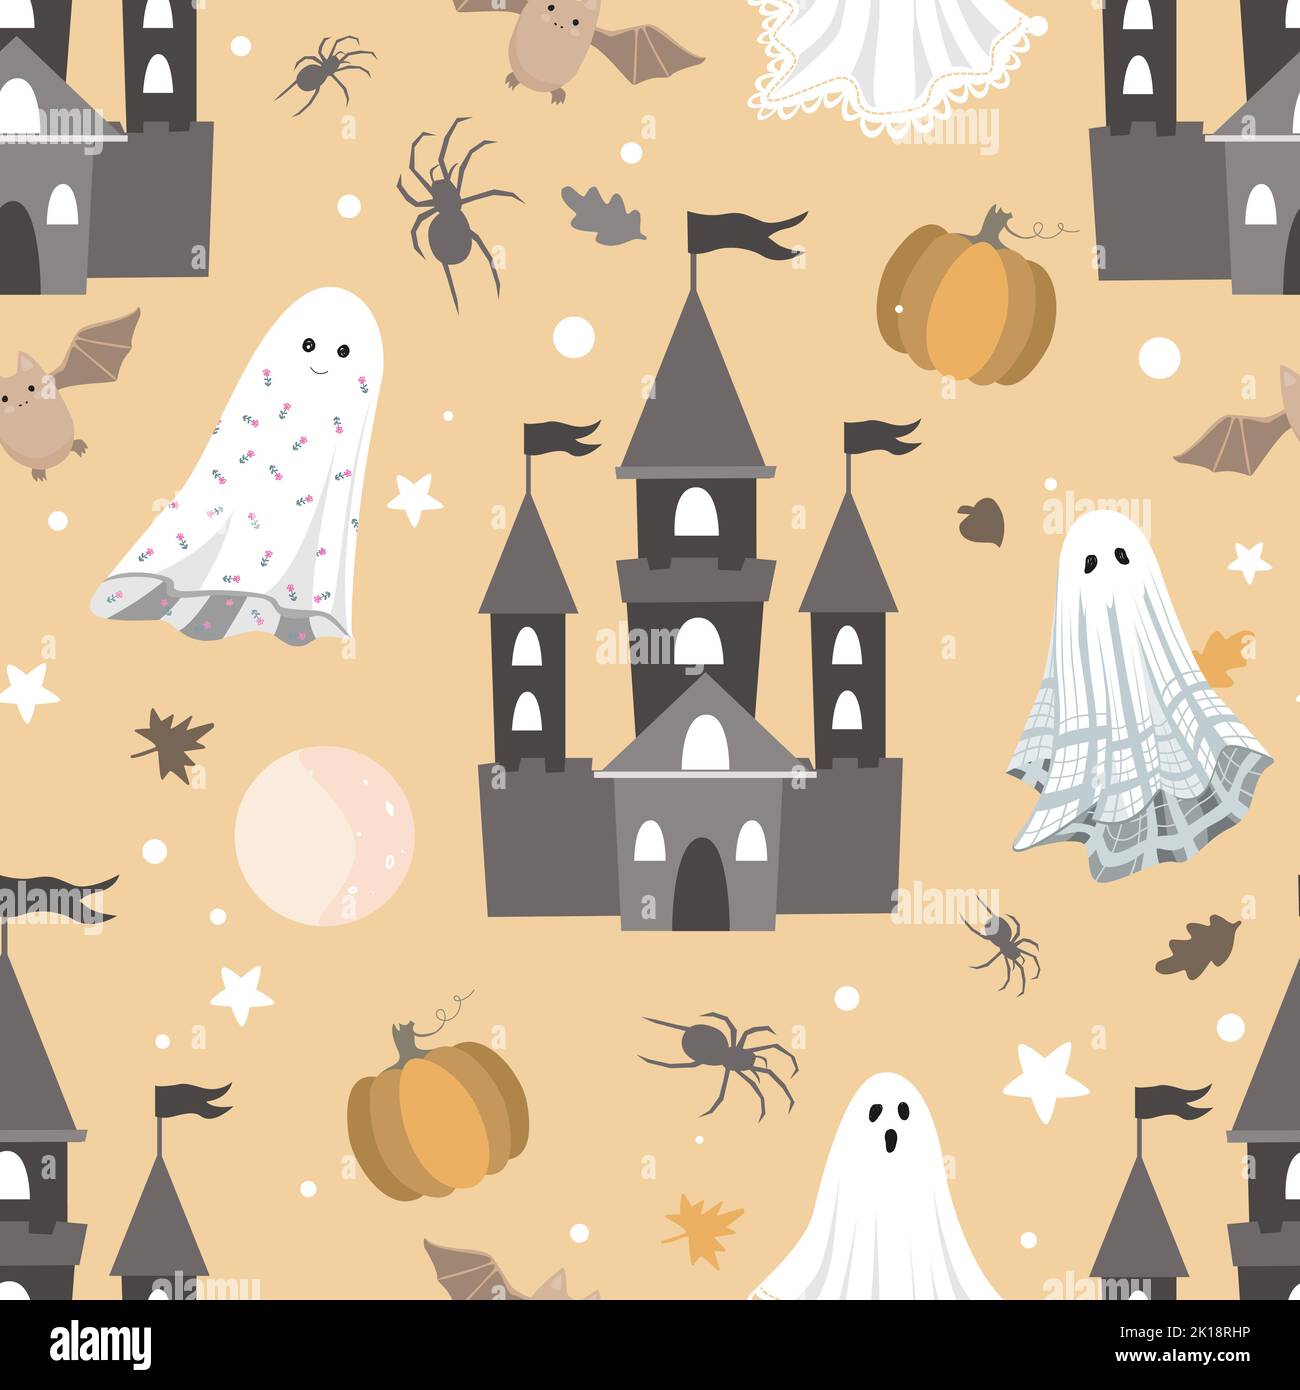 Cute pattern for Halloween. Castles, ghosts, bats, and pumpkins. Vector illustration Stock Vector